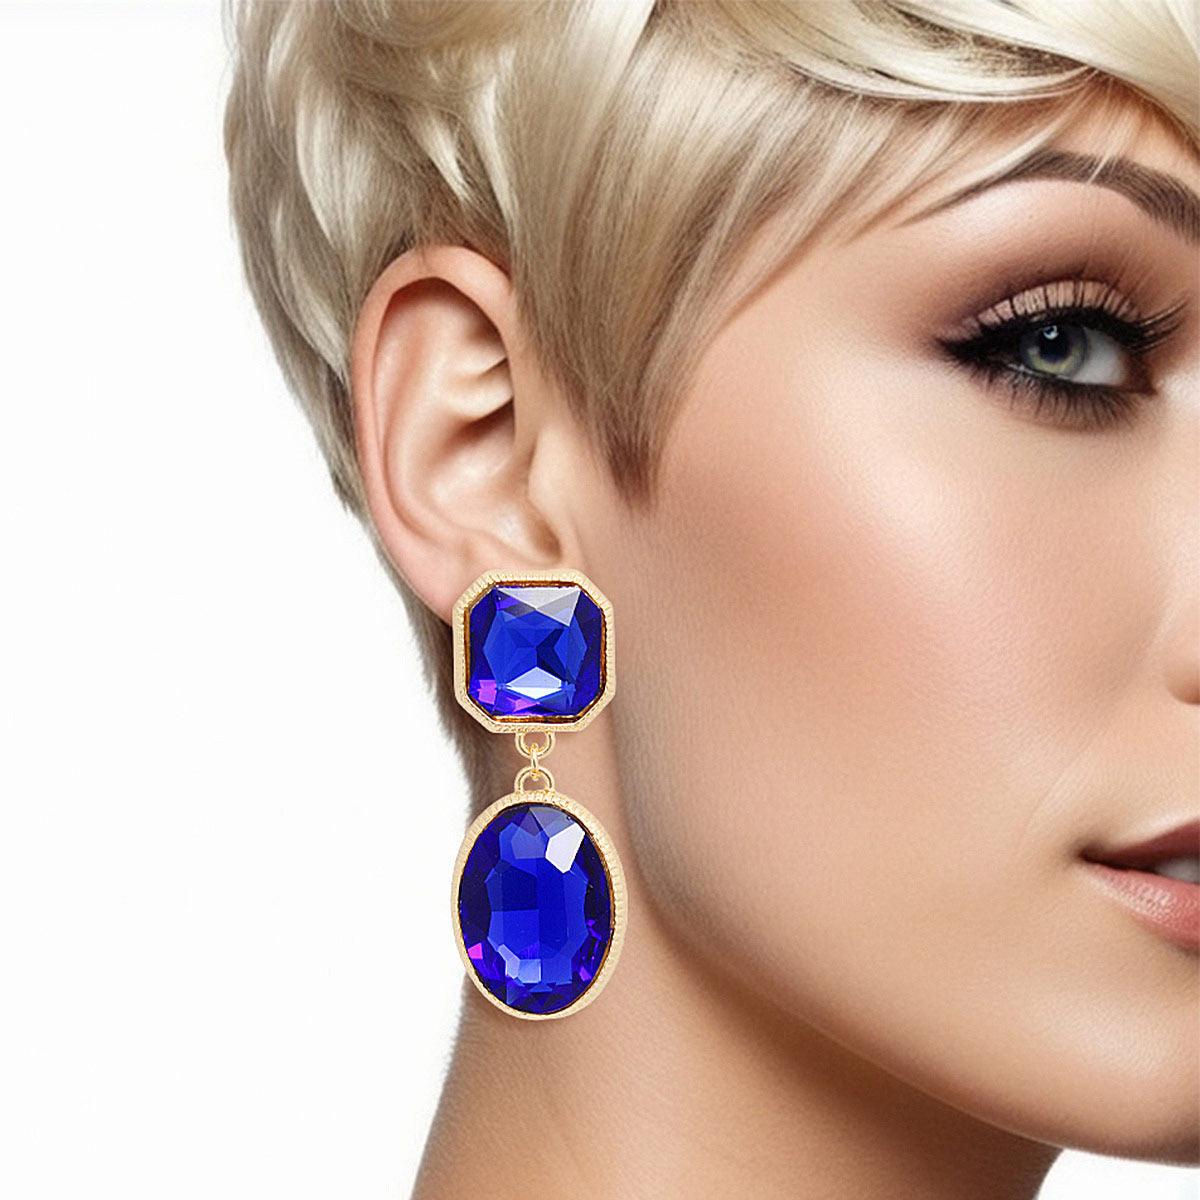 Make an Impression with Blue Drop Clip-on Earrings – Shop Now!